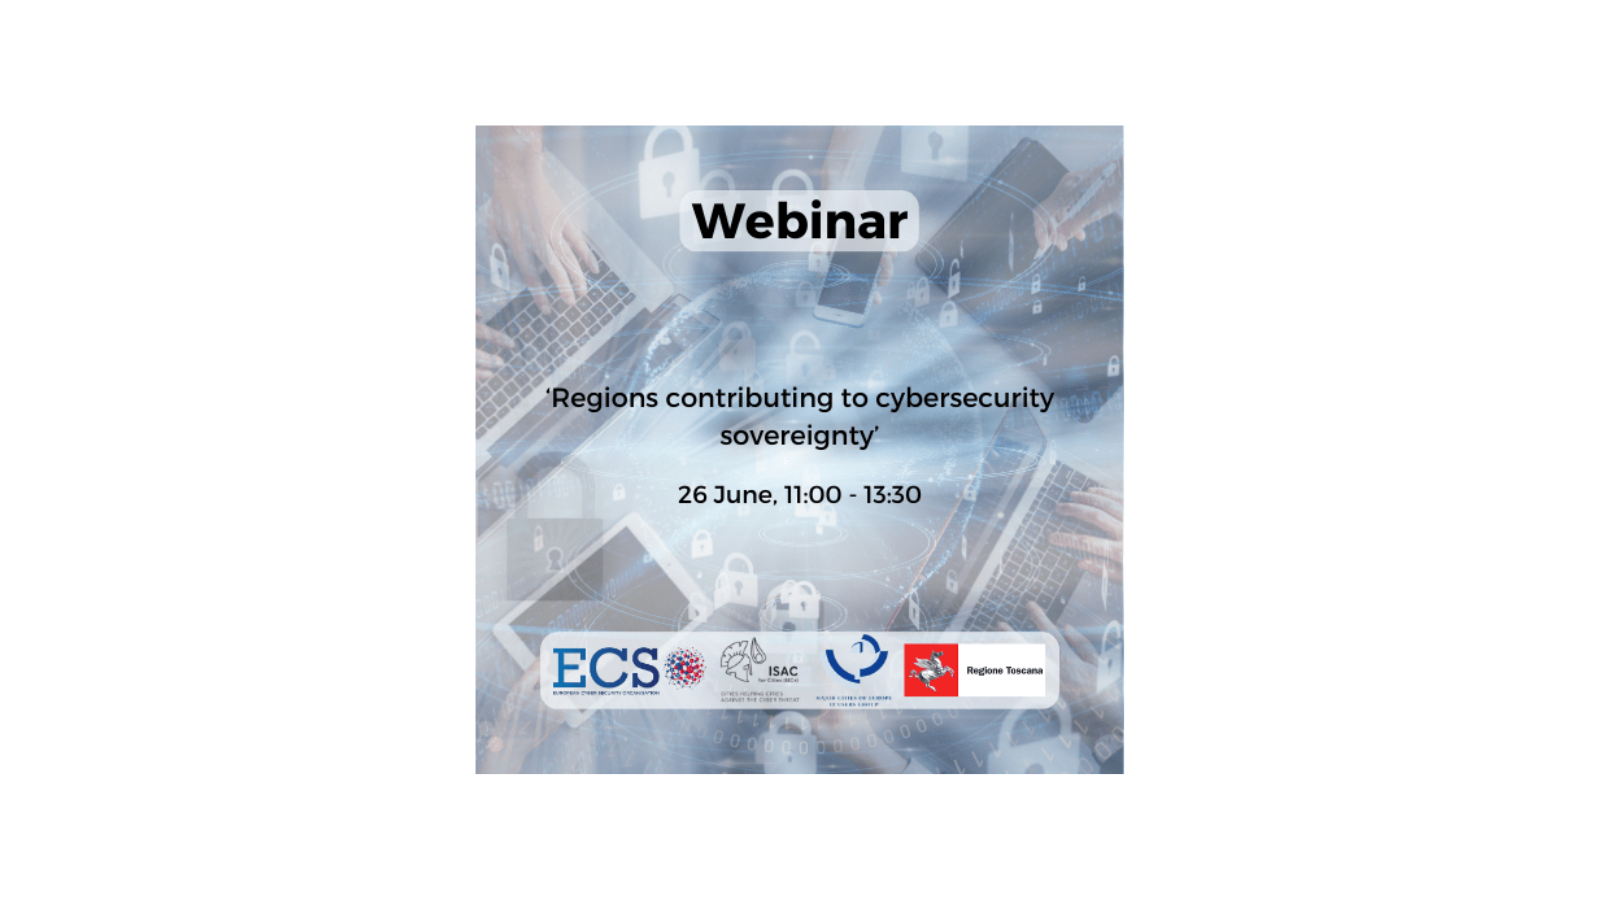 Webinar - Regions contributing to cybersecurity sovereignty